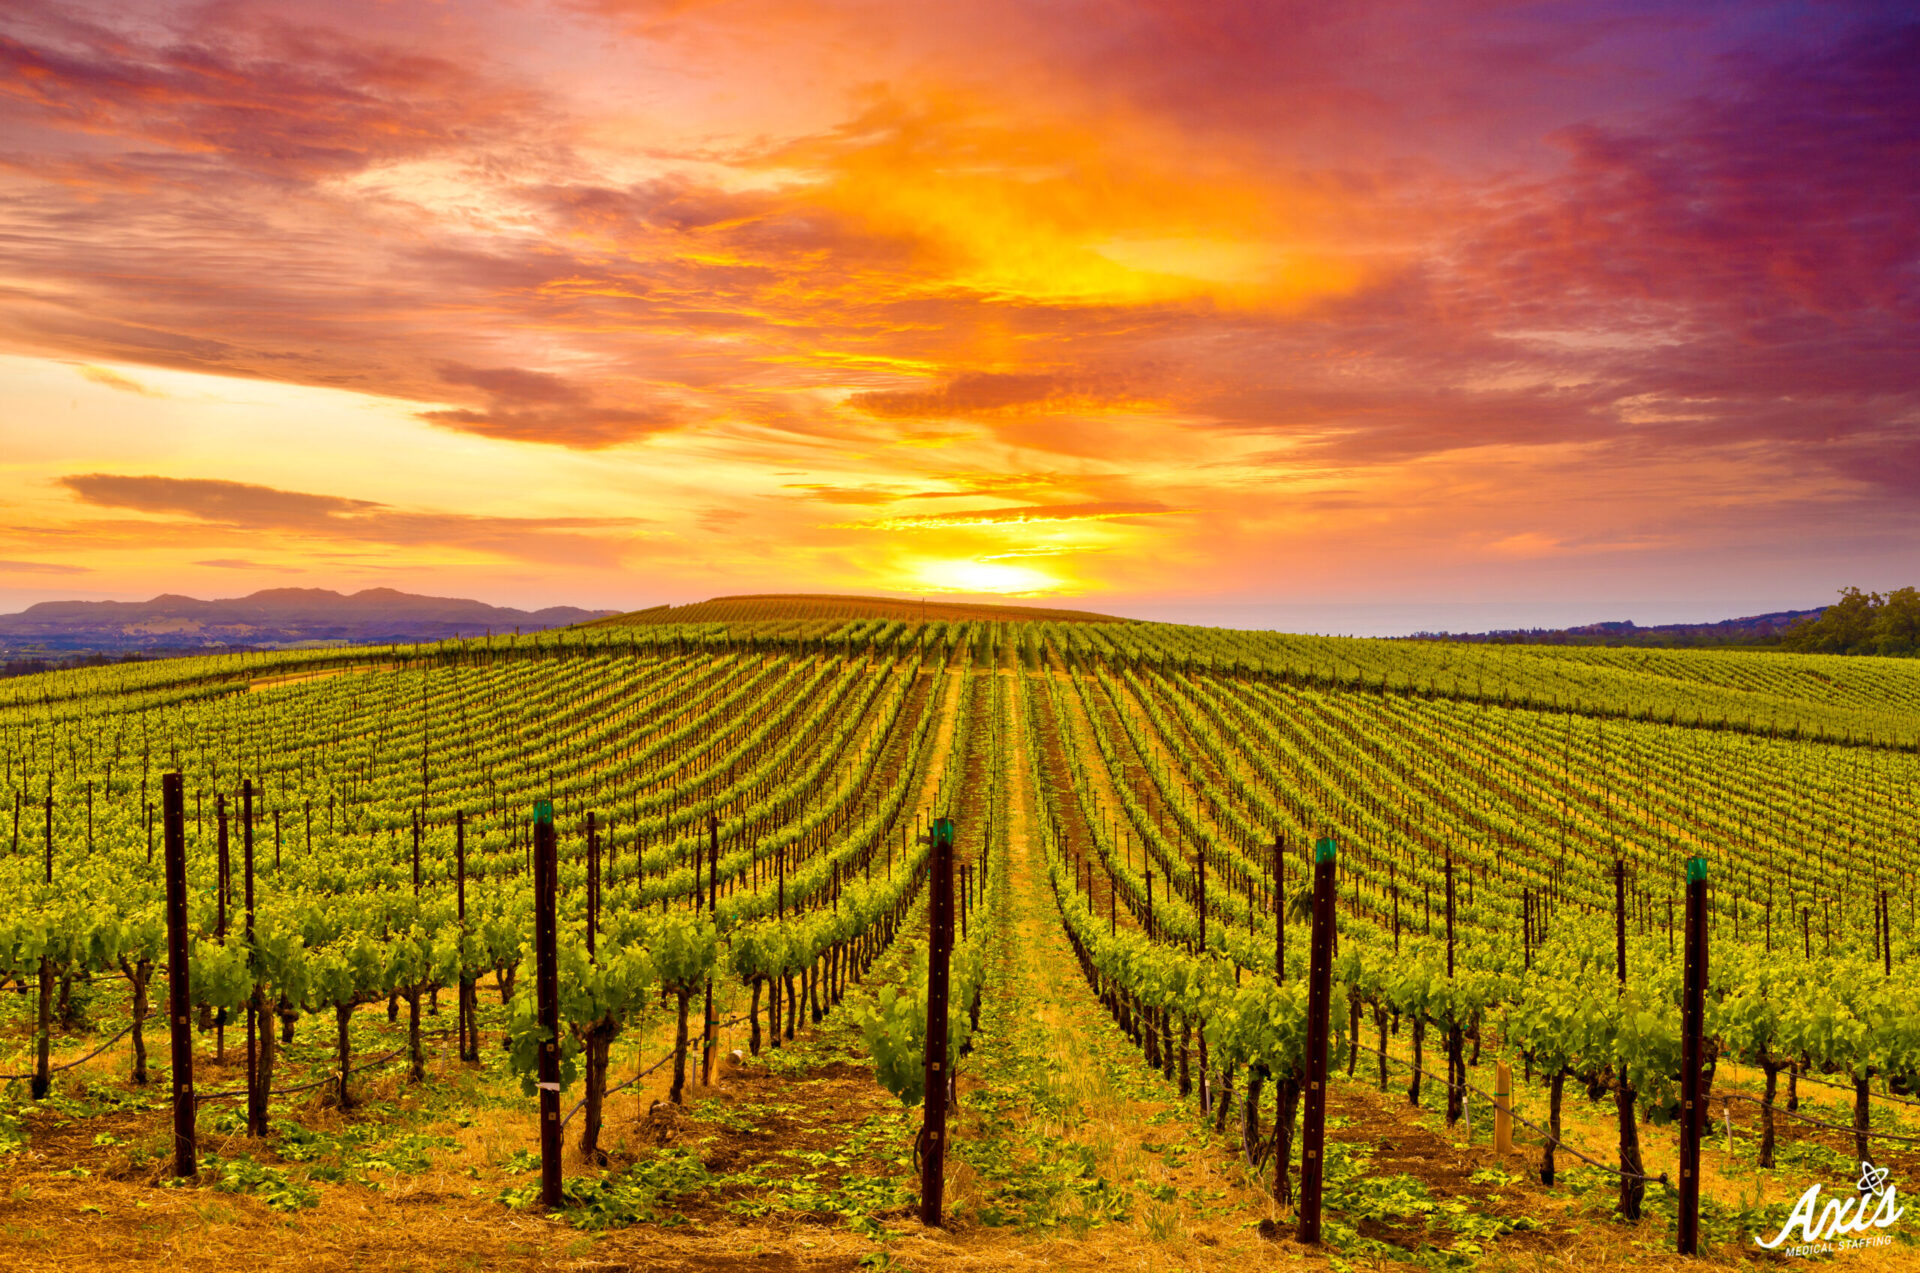 Napa Valley Wine Country Vineyards In Spring And Colorful Sunset Axis